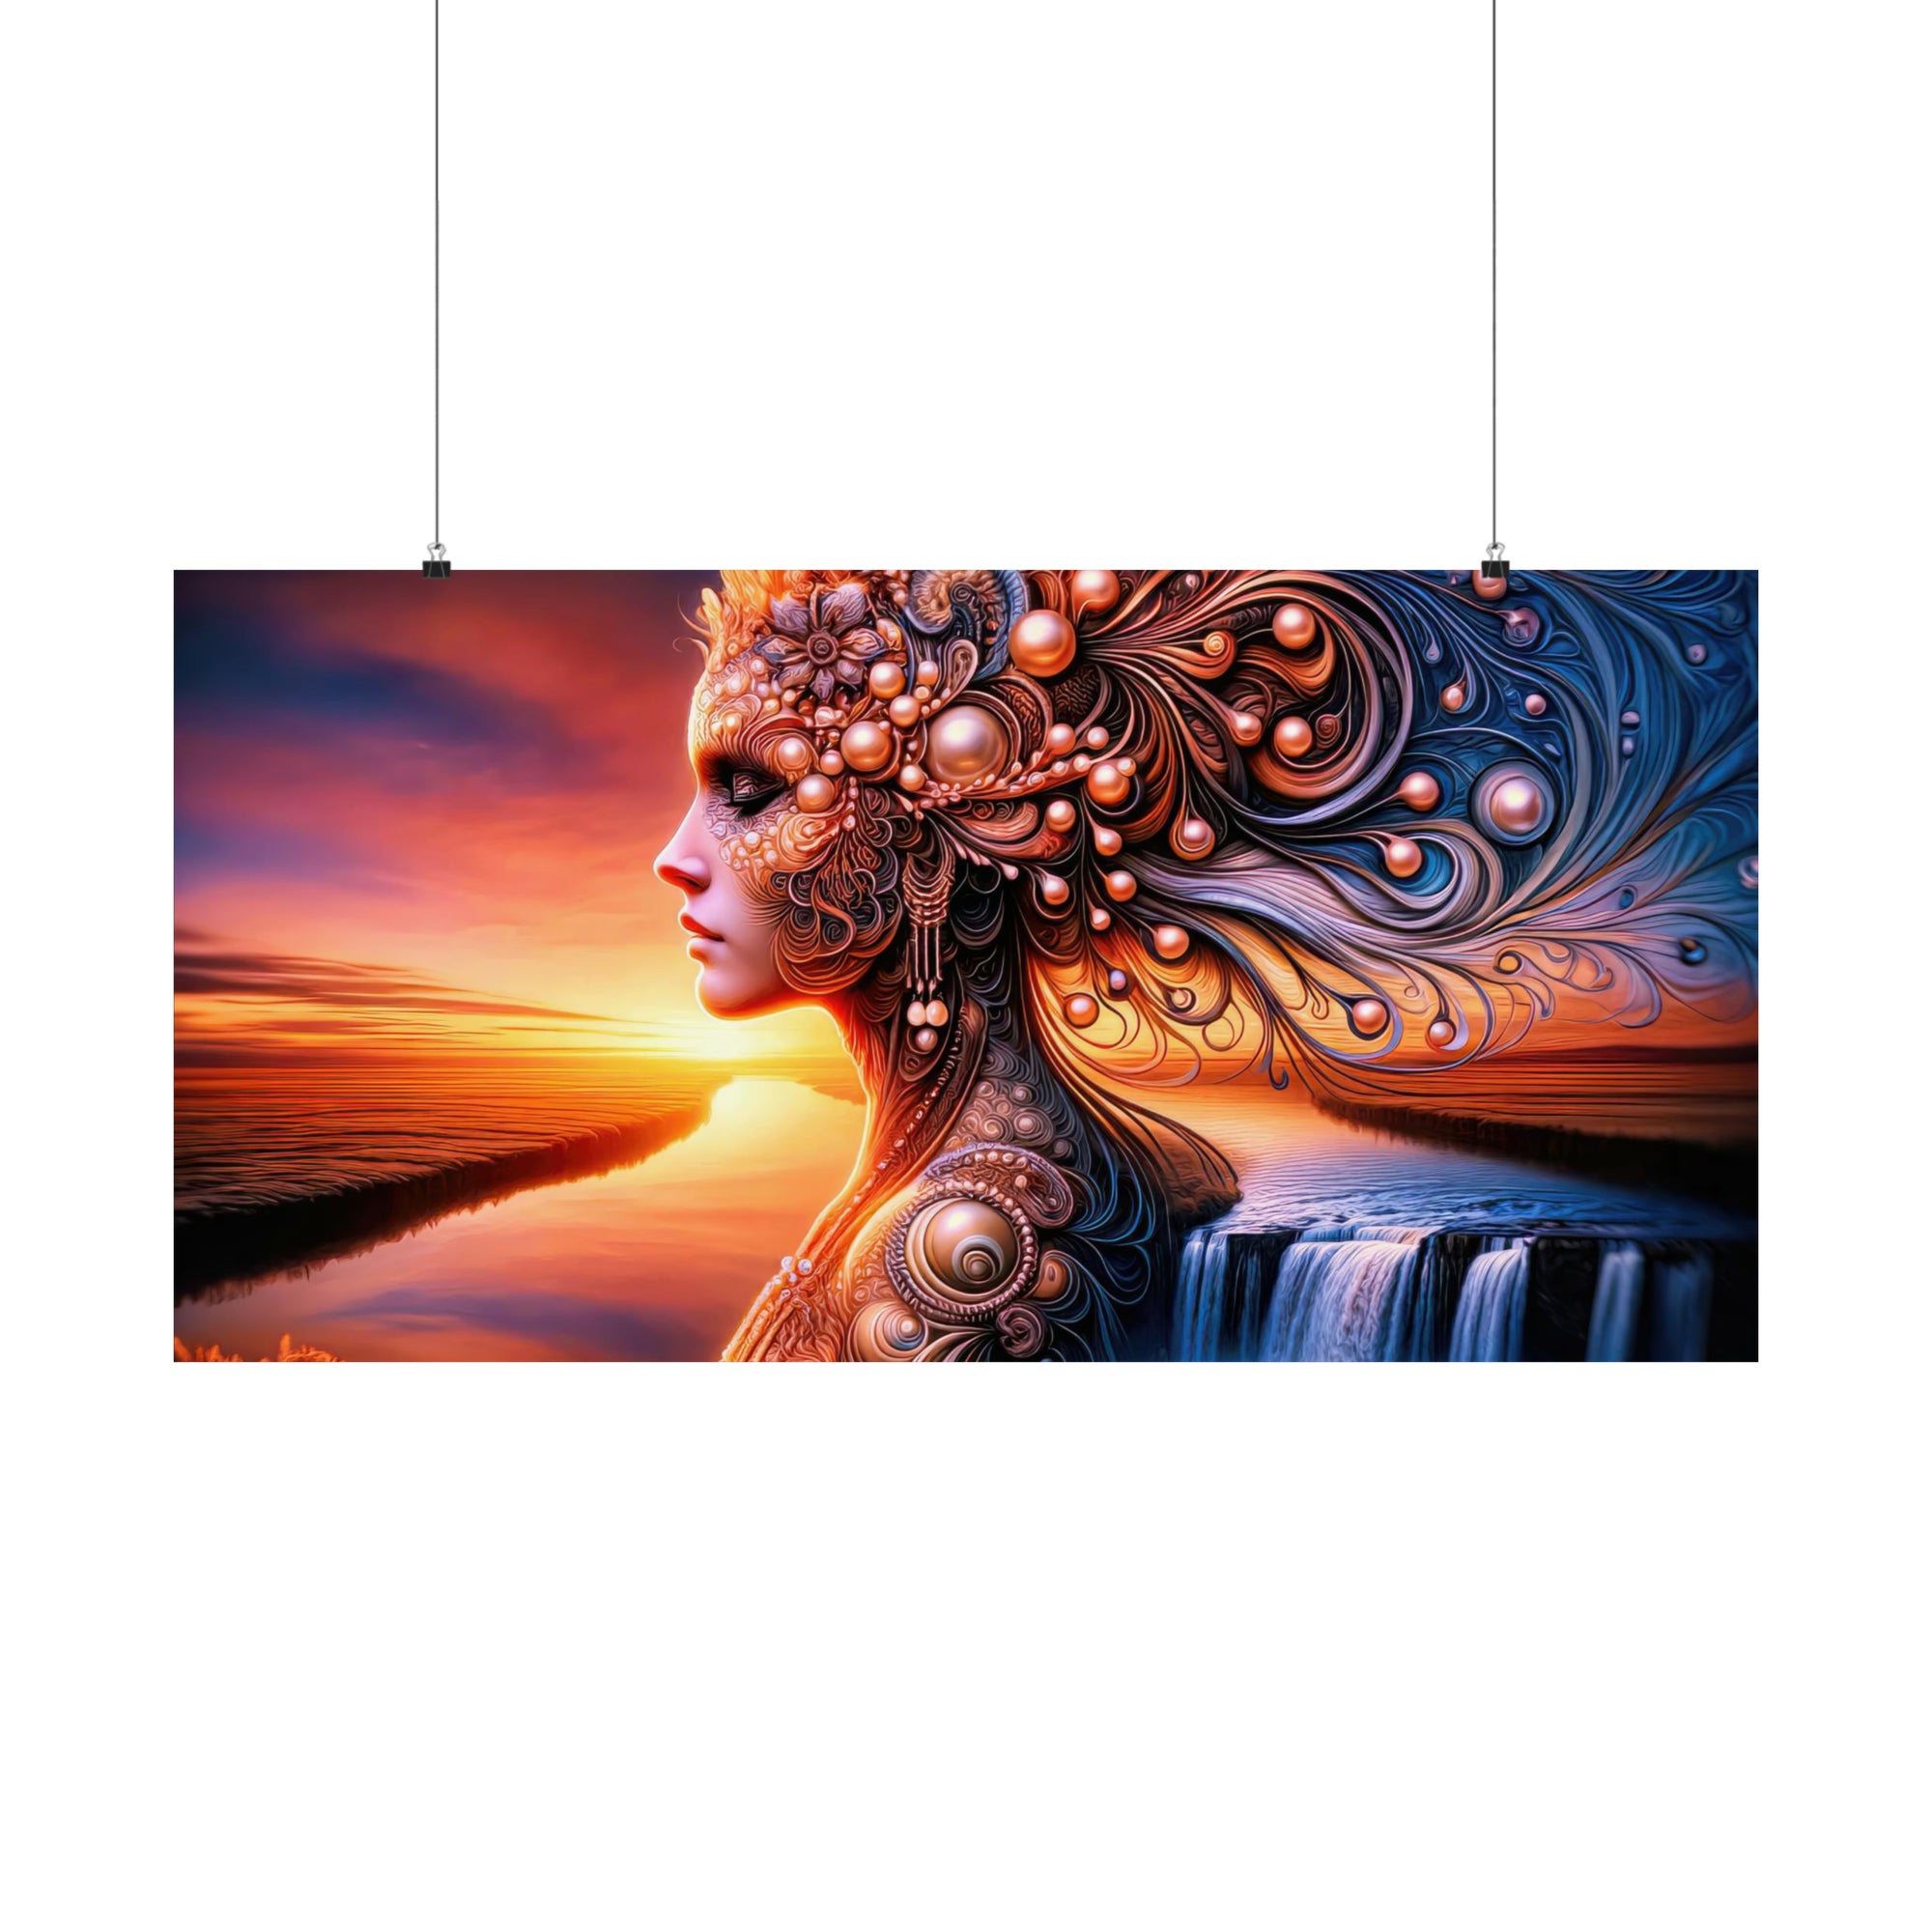 Pearlescent Dreams at Dusk Poster